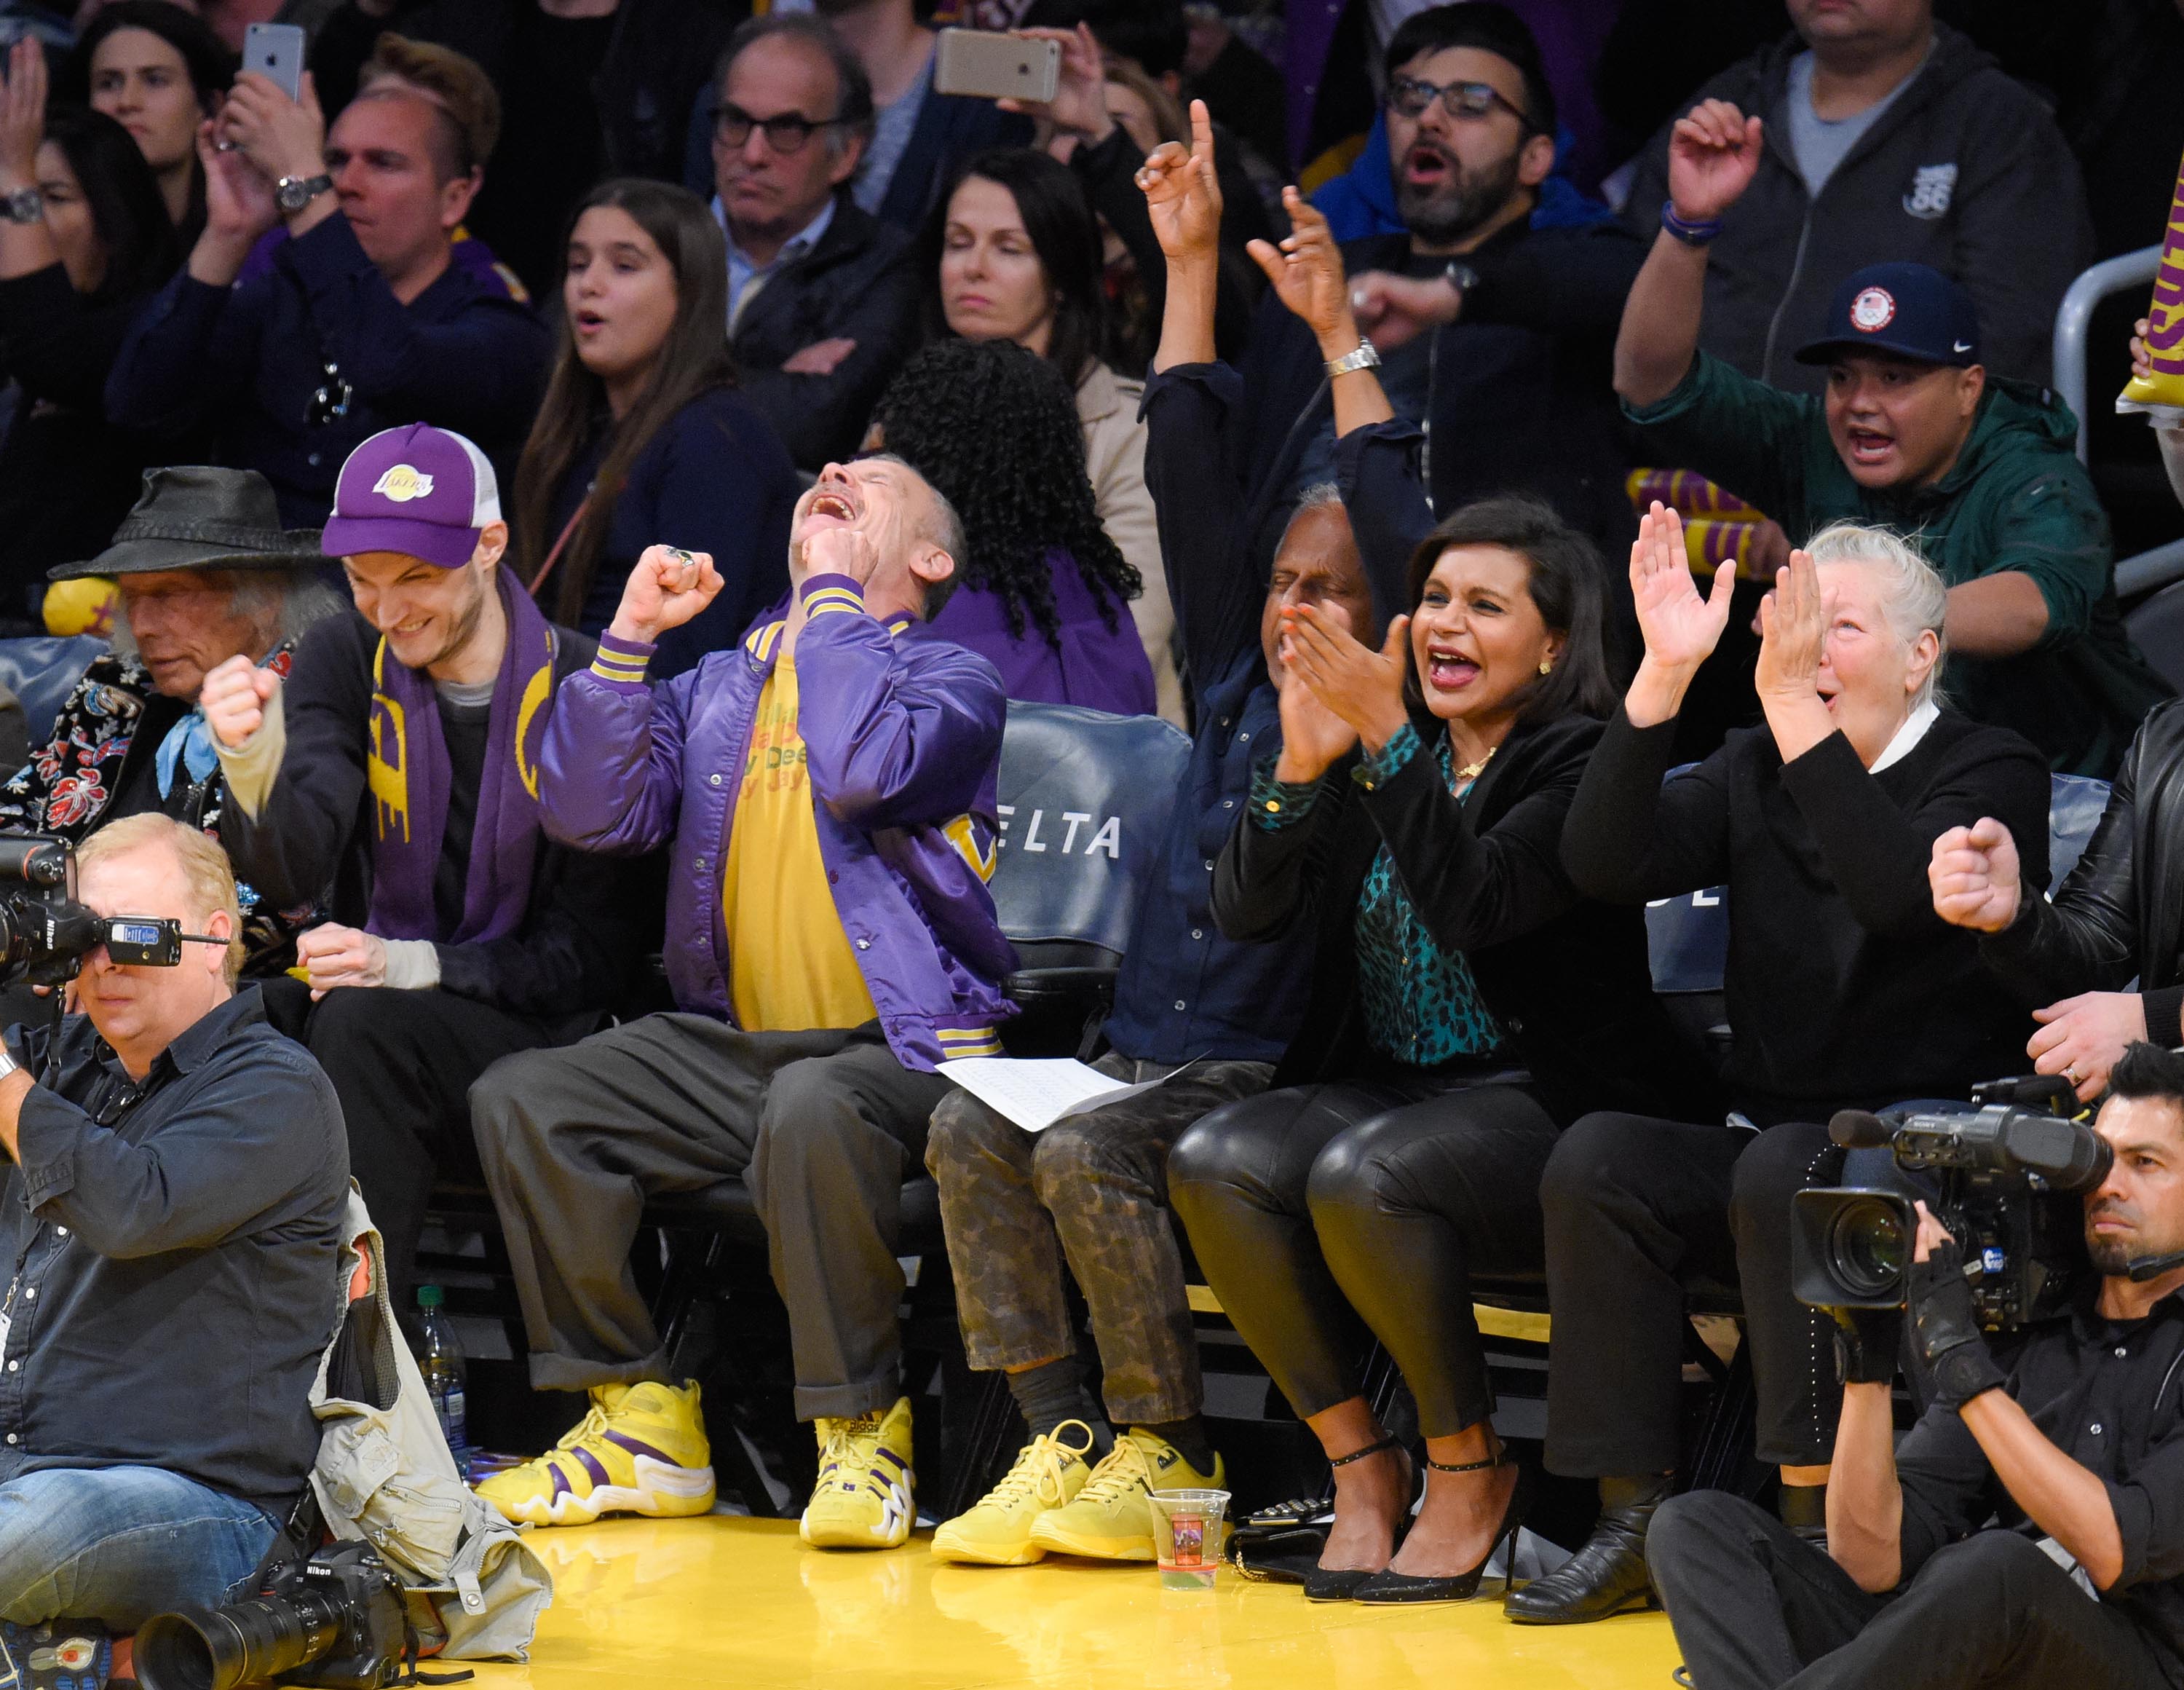 Mindy Kaling attends a basketball game between the Utah Jazz and the LA Lakers